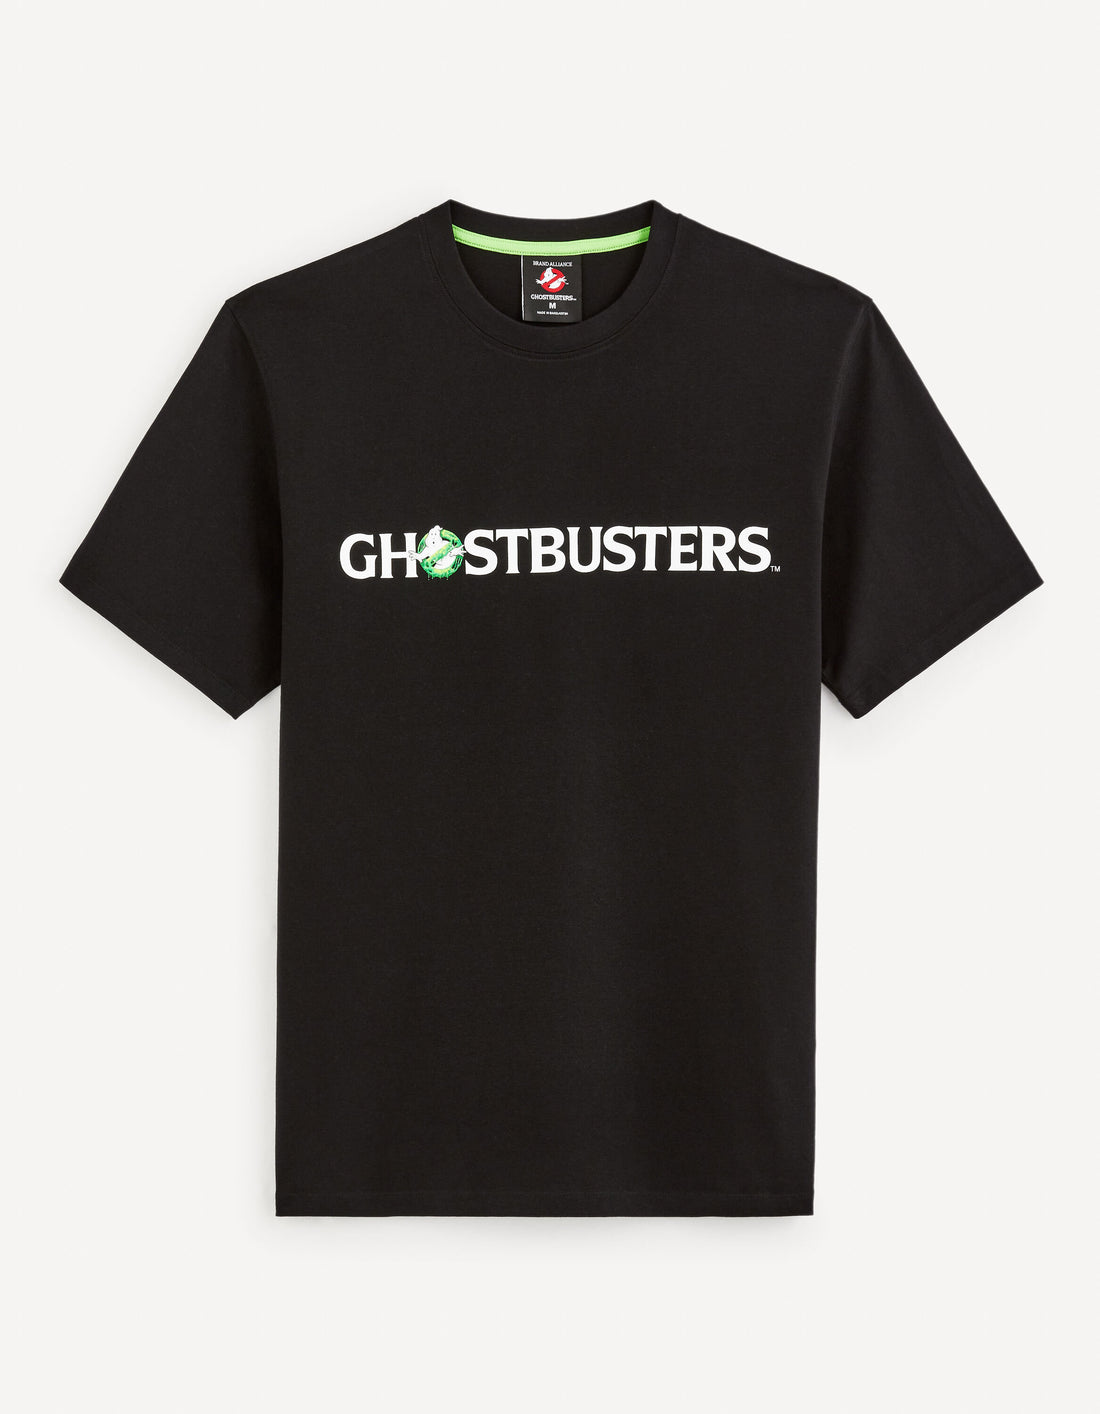 Ghostbusters - 100% Cotton T-Shirt_LGEBUSTER_BLACK_01